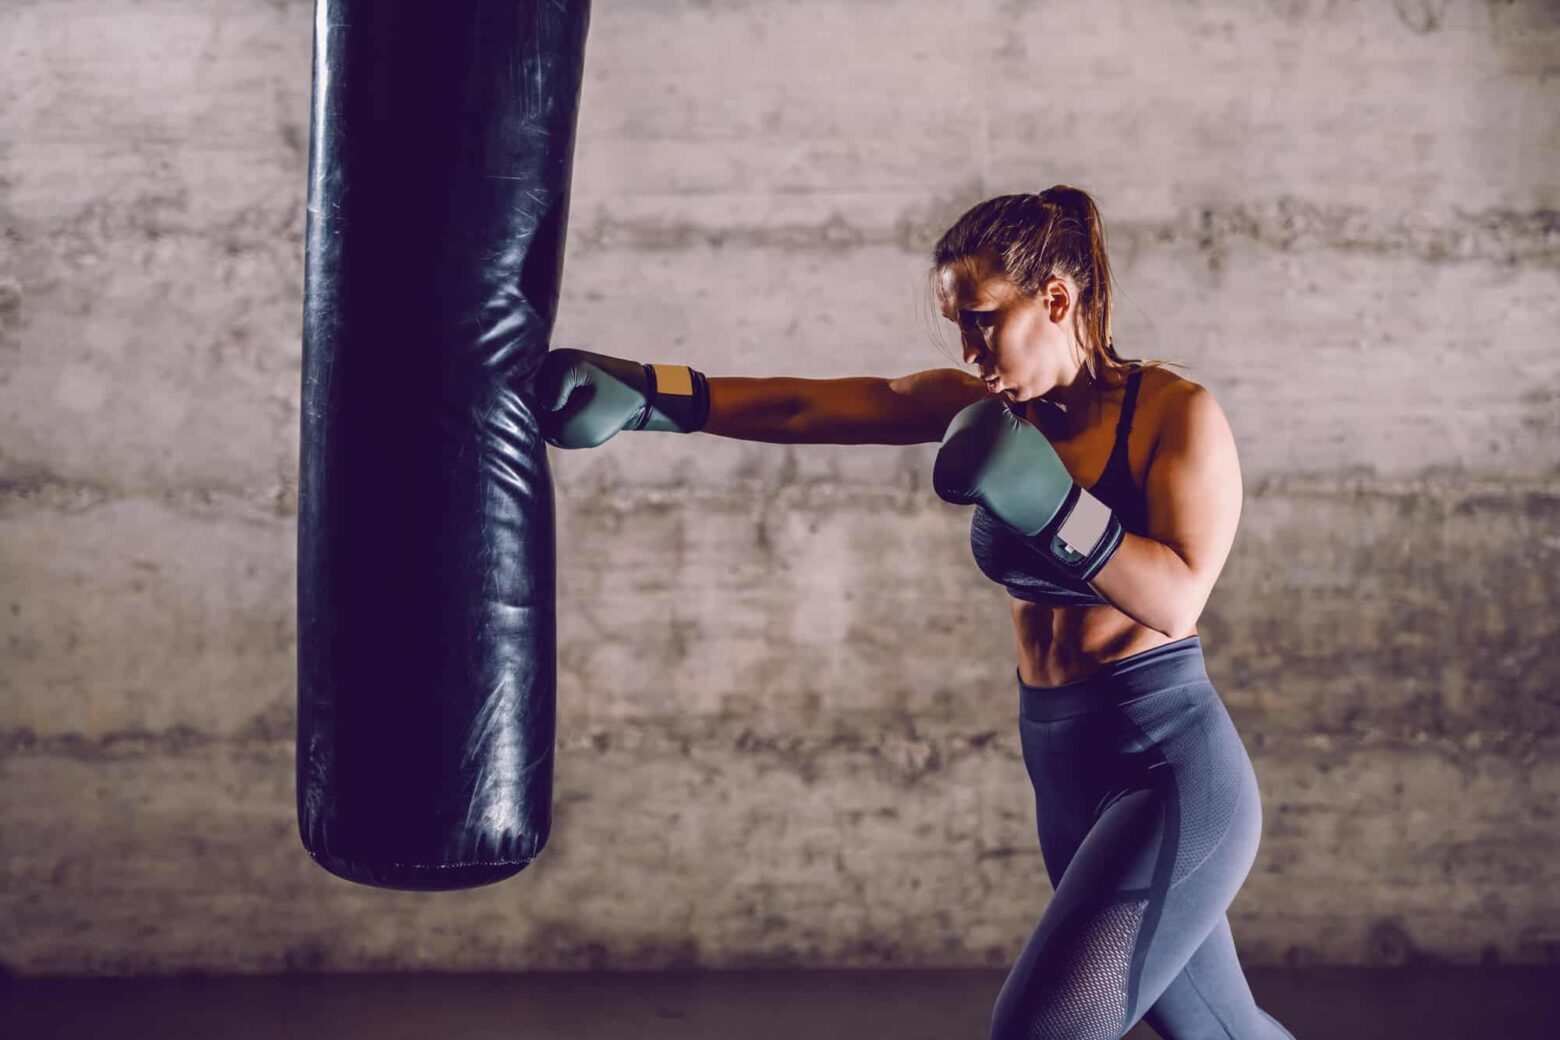 How to Choose the Best Gloves for Kickboxing